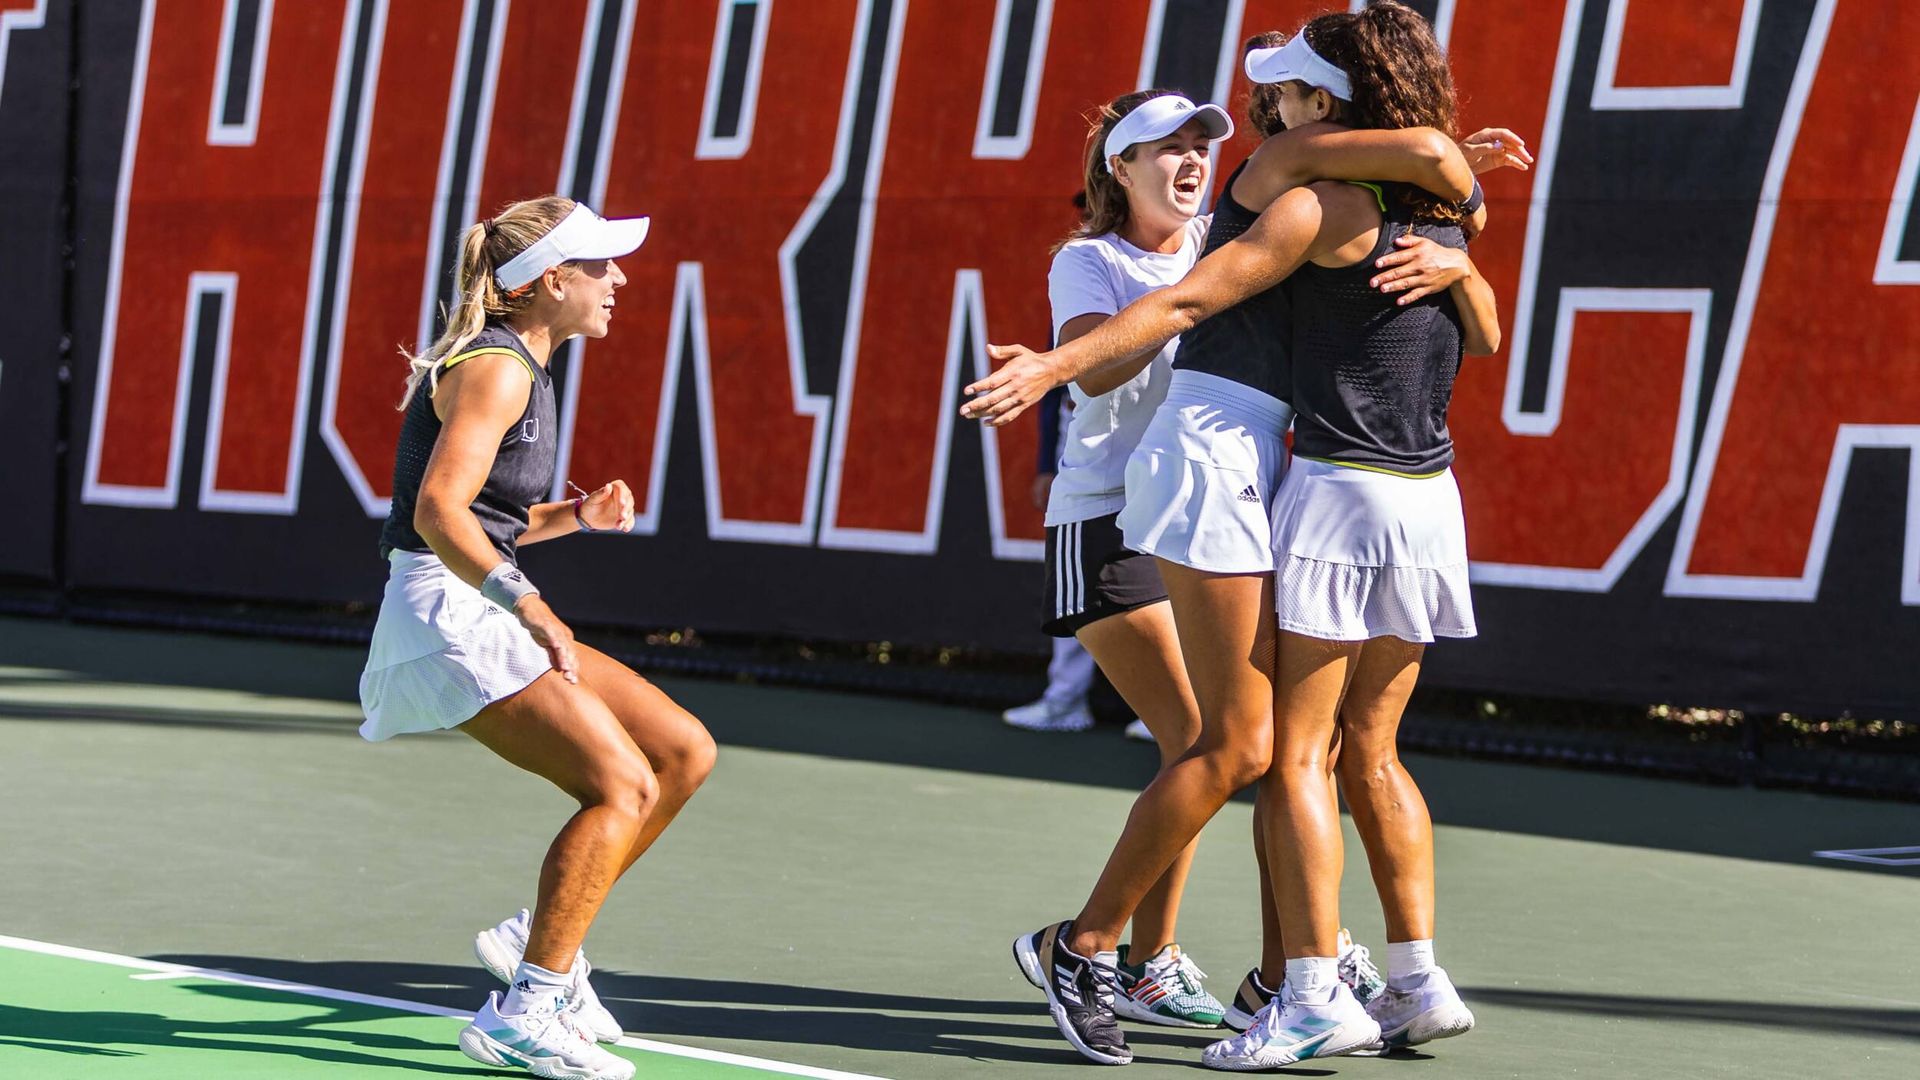 W. Tennis Takes Down Fifth-Ranked NC State, 4-3